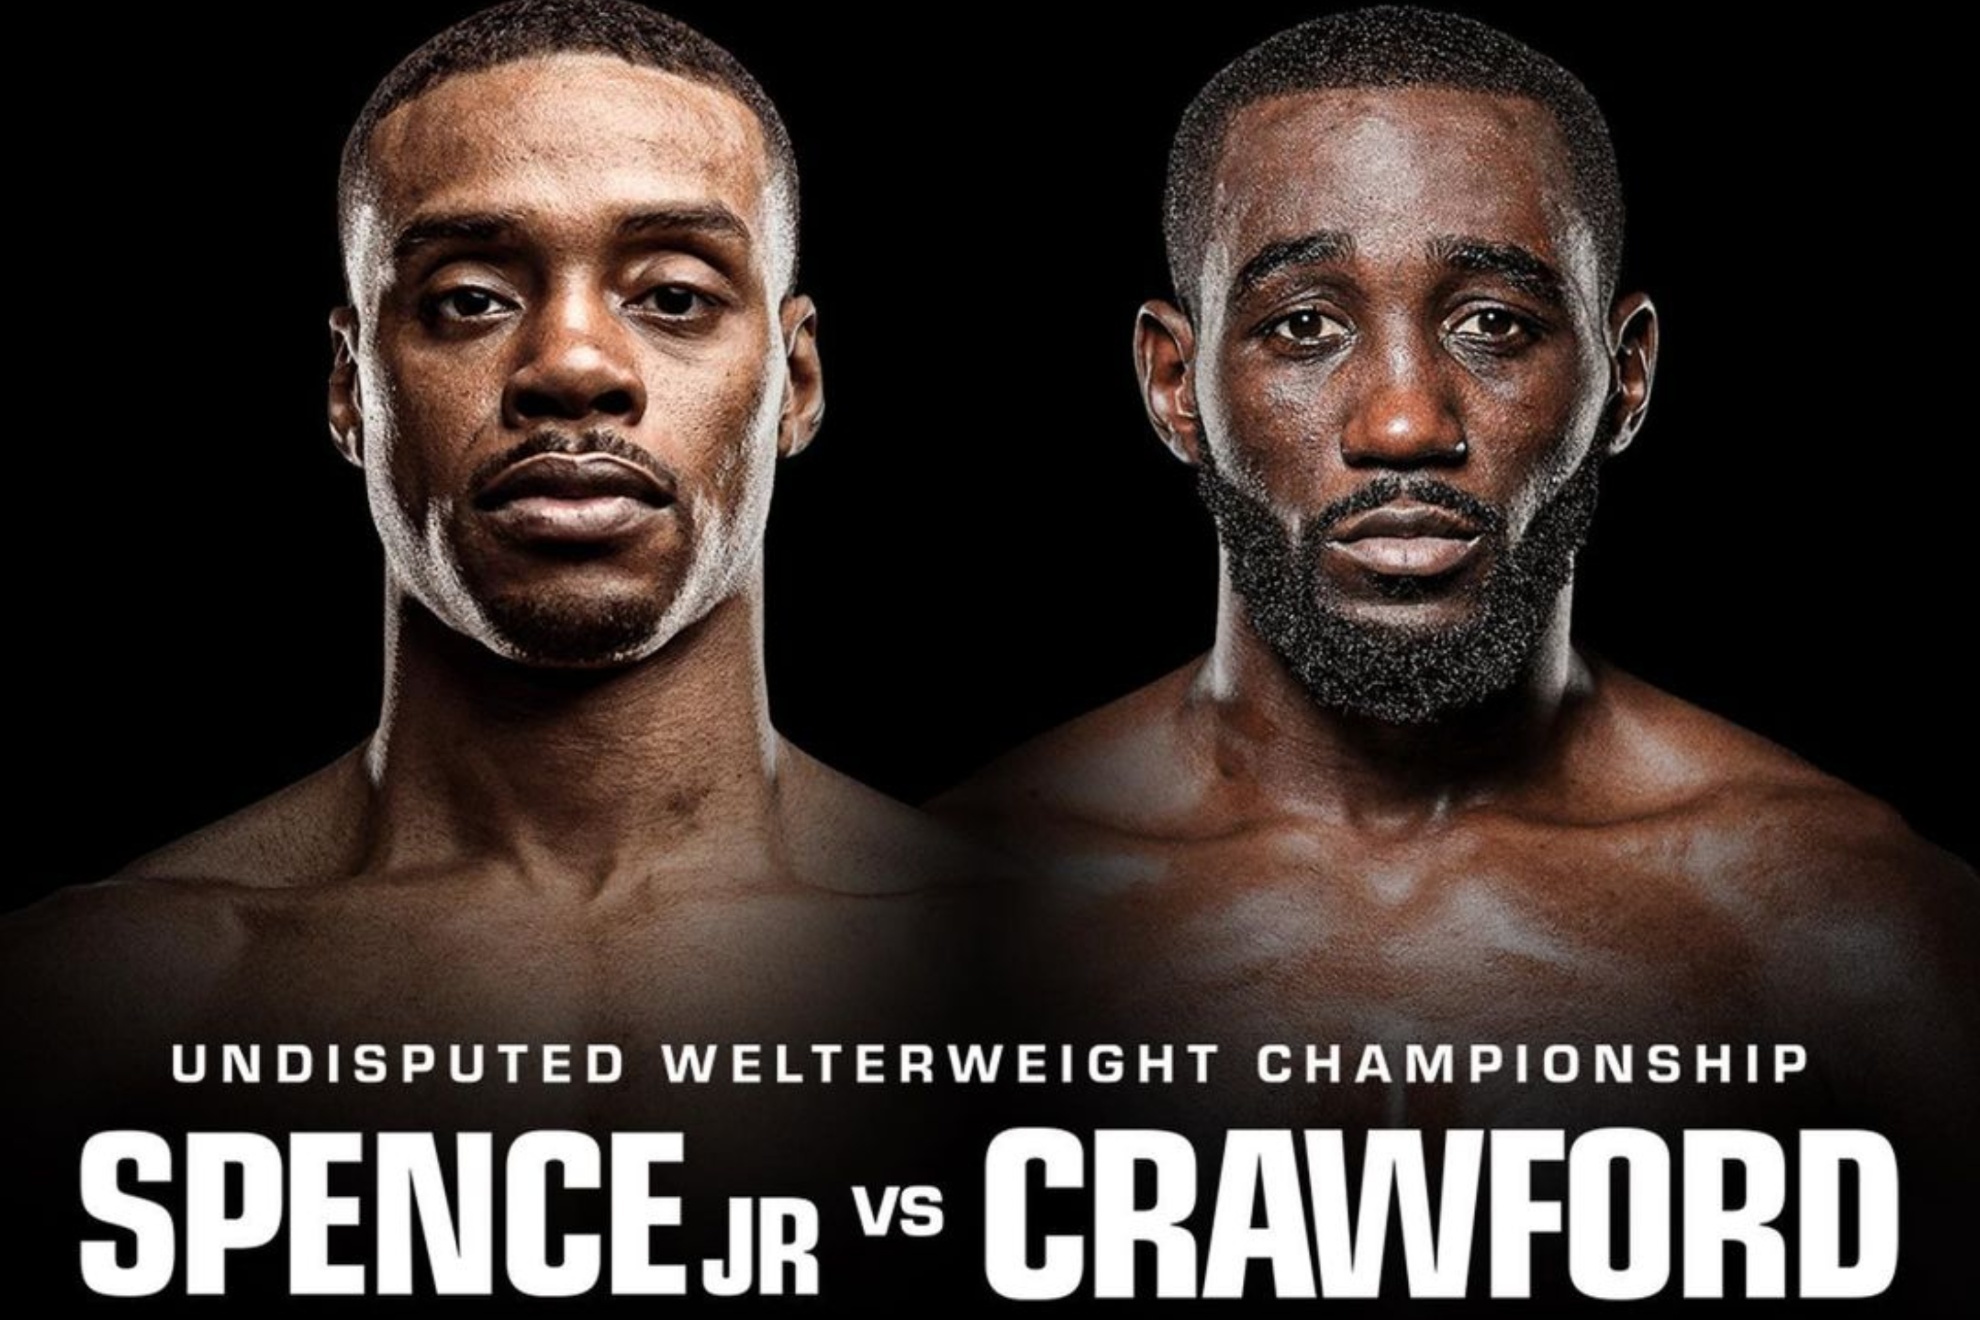 Errol Spence Jr. and Terence Crawford will feature in one of the most anticipated boxing fights of the last years